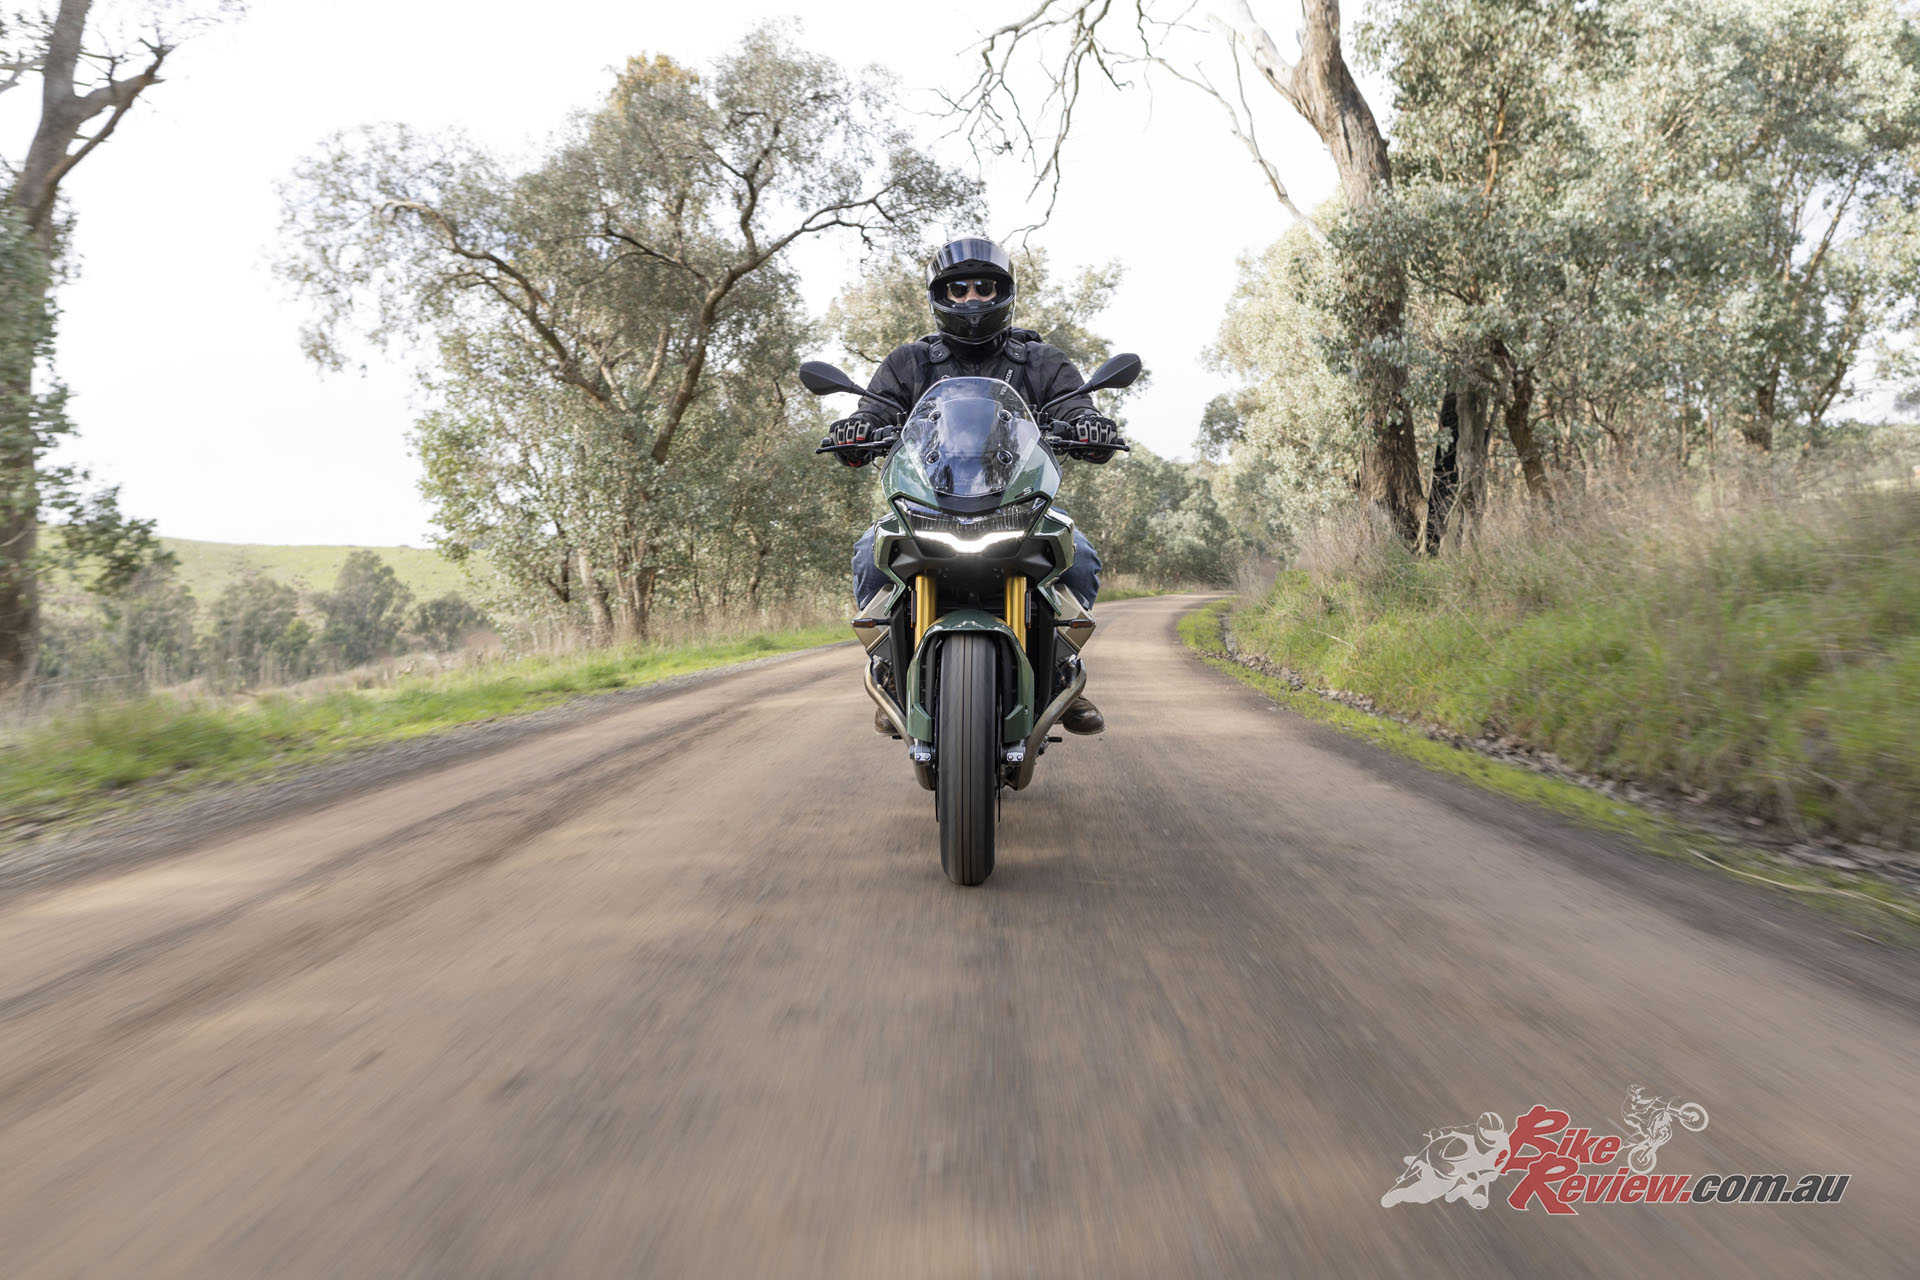 "The key takeaway, I absolutely love it! The Moto Guzzi V100 Mandello is more than just a motorcycle; it's a work of art that combines jaw-dropping aesthetics with unmatched performance."